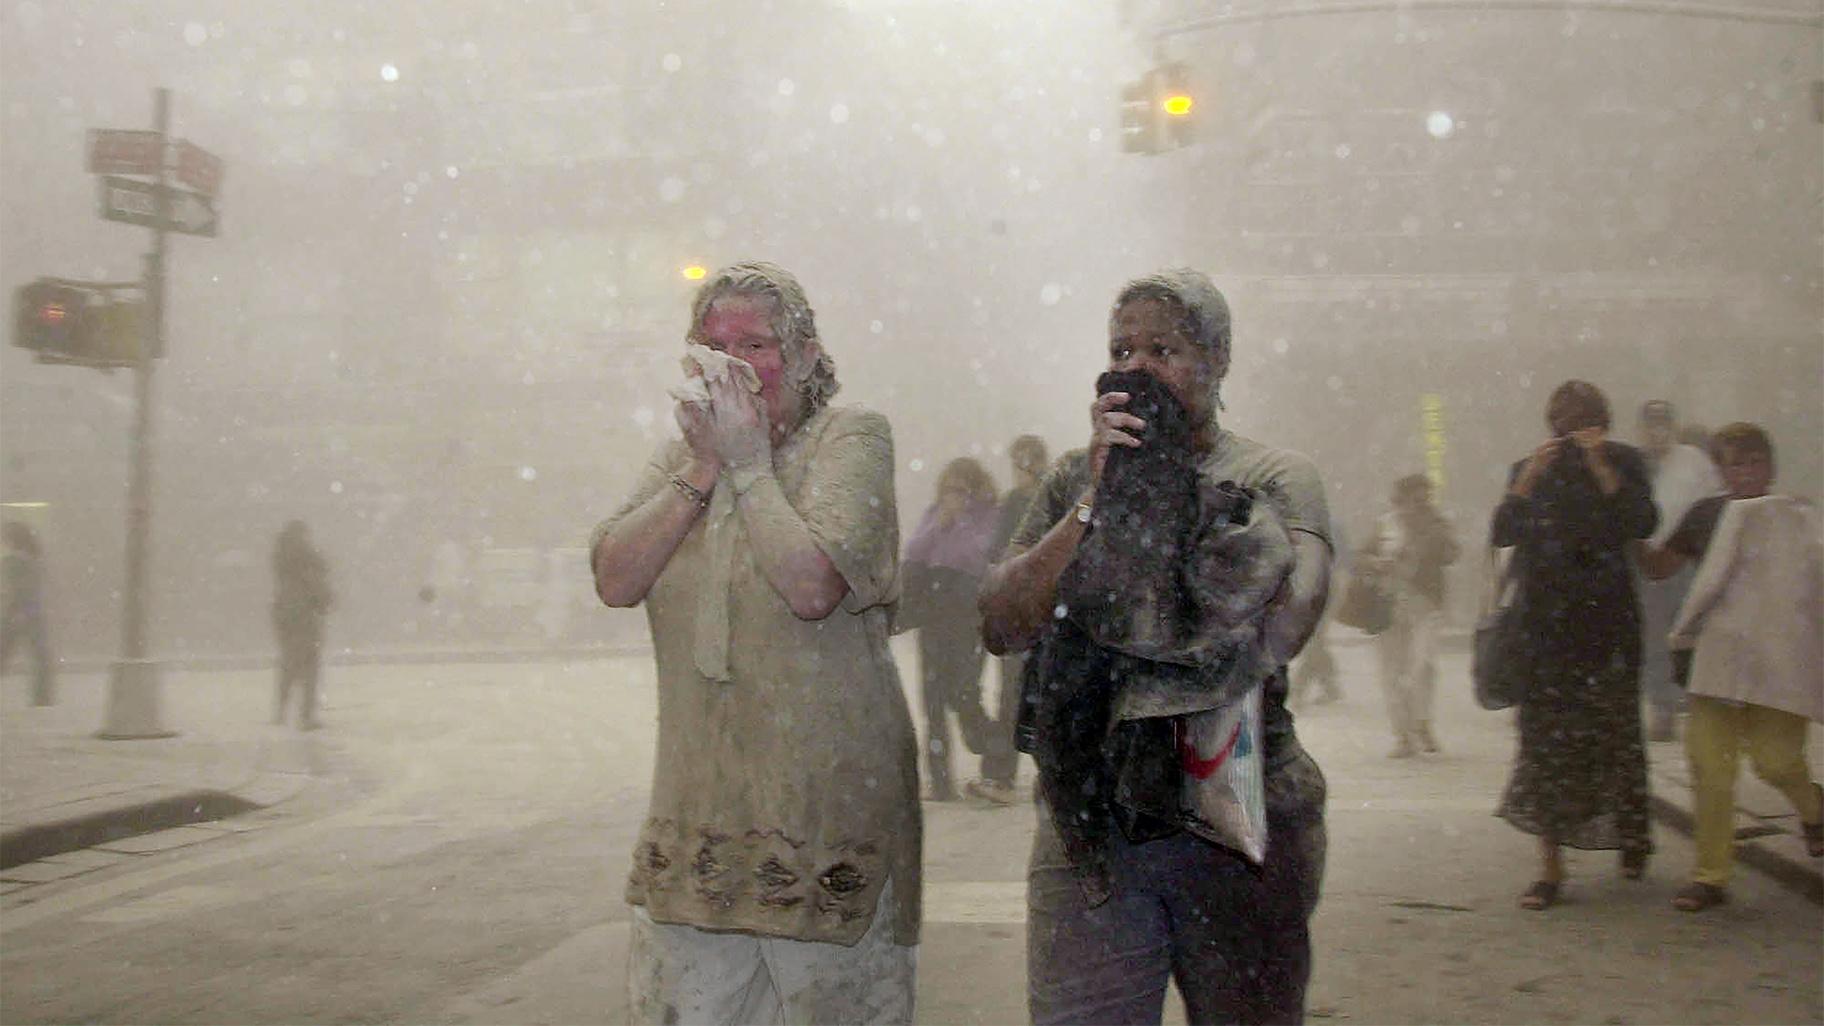 In this Sept. 11, 2001 file photo, people covered in dust from the collapsed World Trade Center buildings, walk through the area, in New York. (AP Photo / Suzanne Plunkett, File)